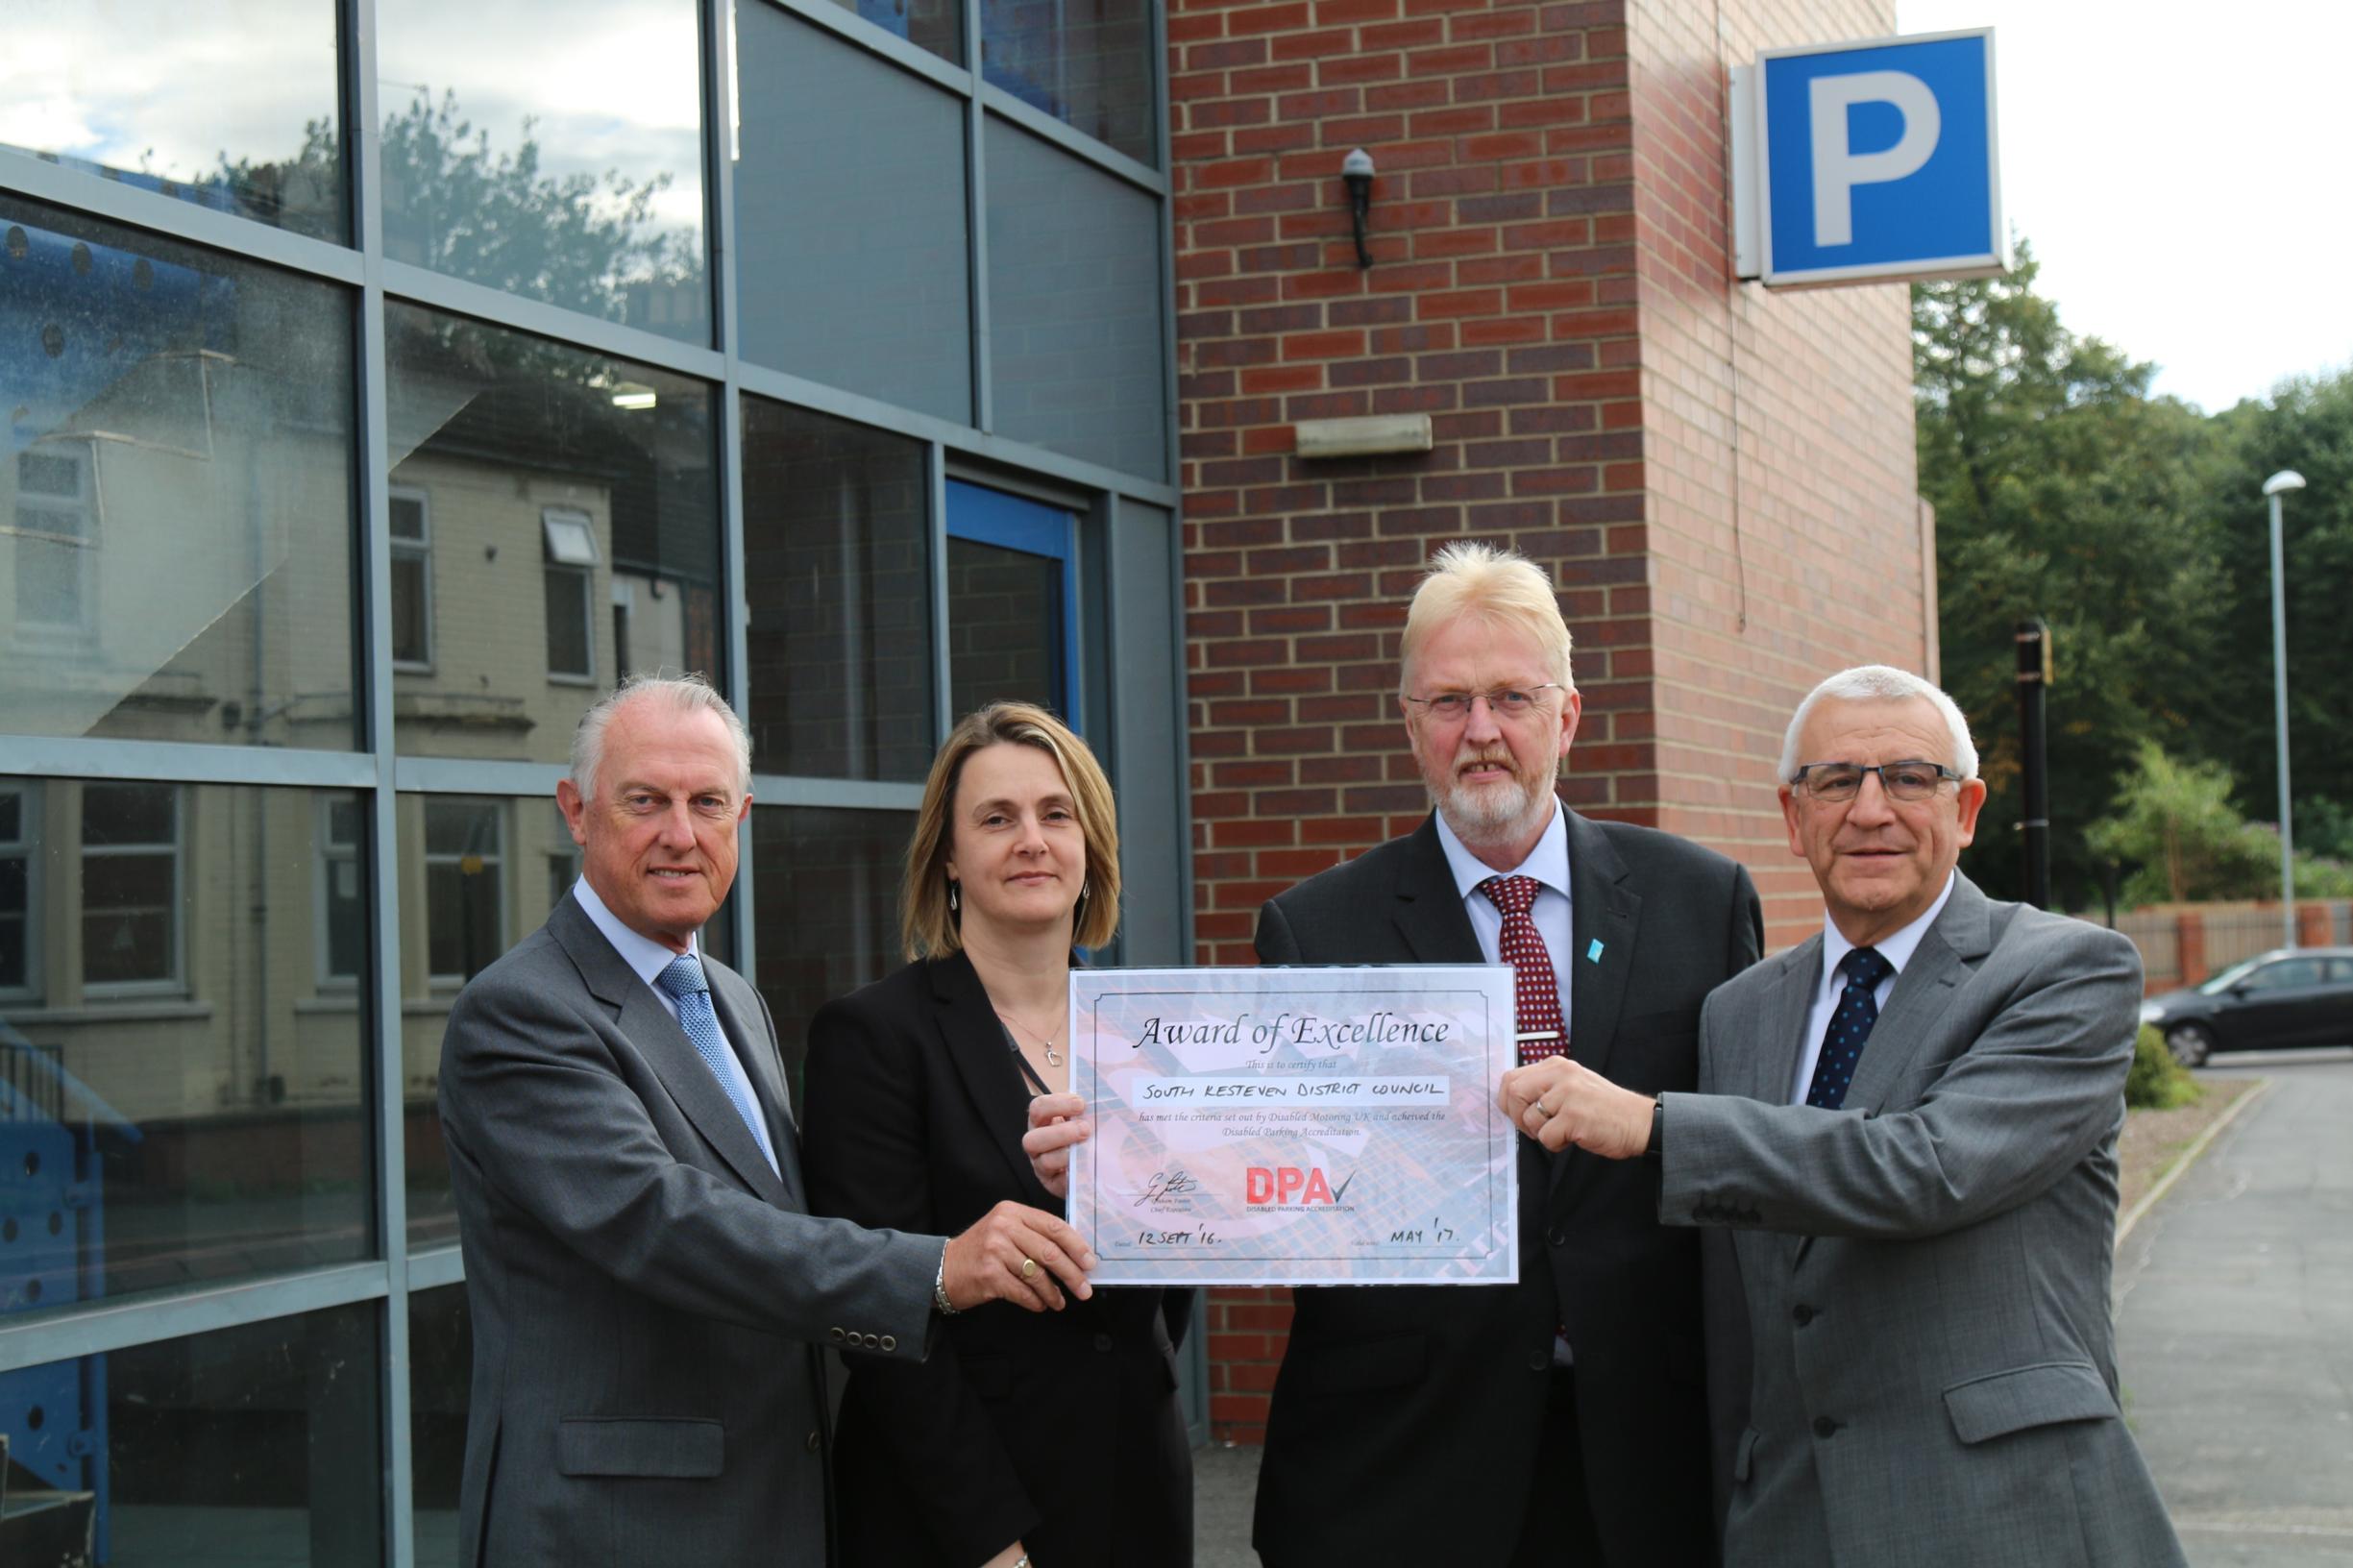 Photo: (L-R) Cllr Nick Craft, Jeanette Hedison, SKDC’s facilities and car park co-ordinator, Peter Gravells, BPA, and Paul Stokes, SKDC’s venues and facilities manager